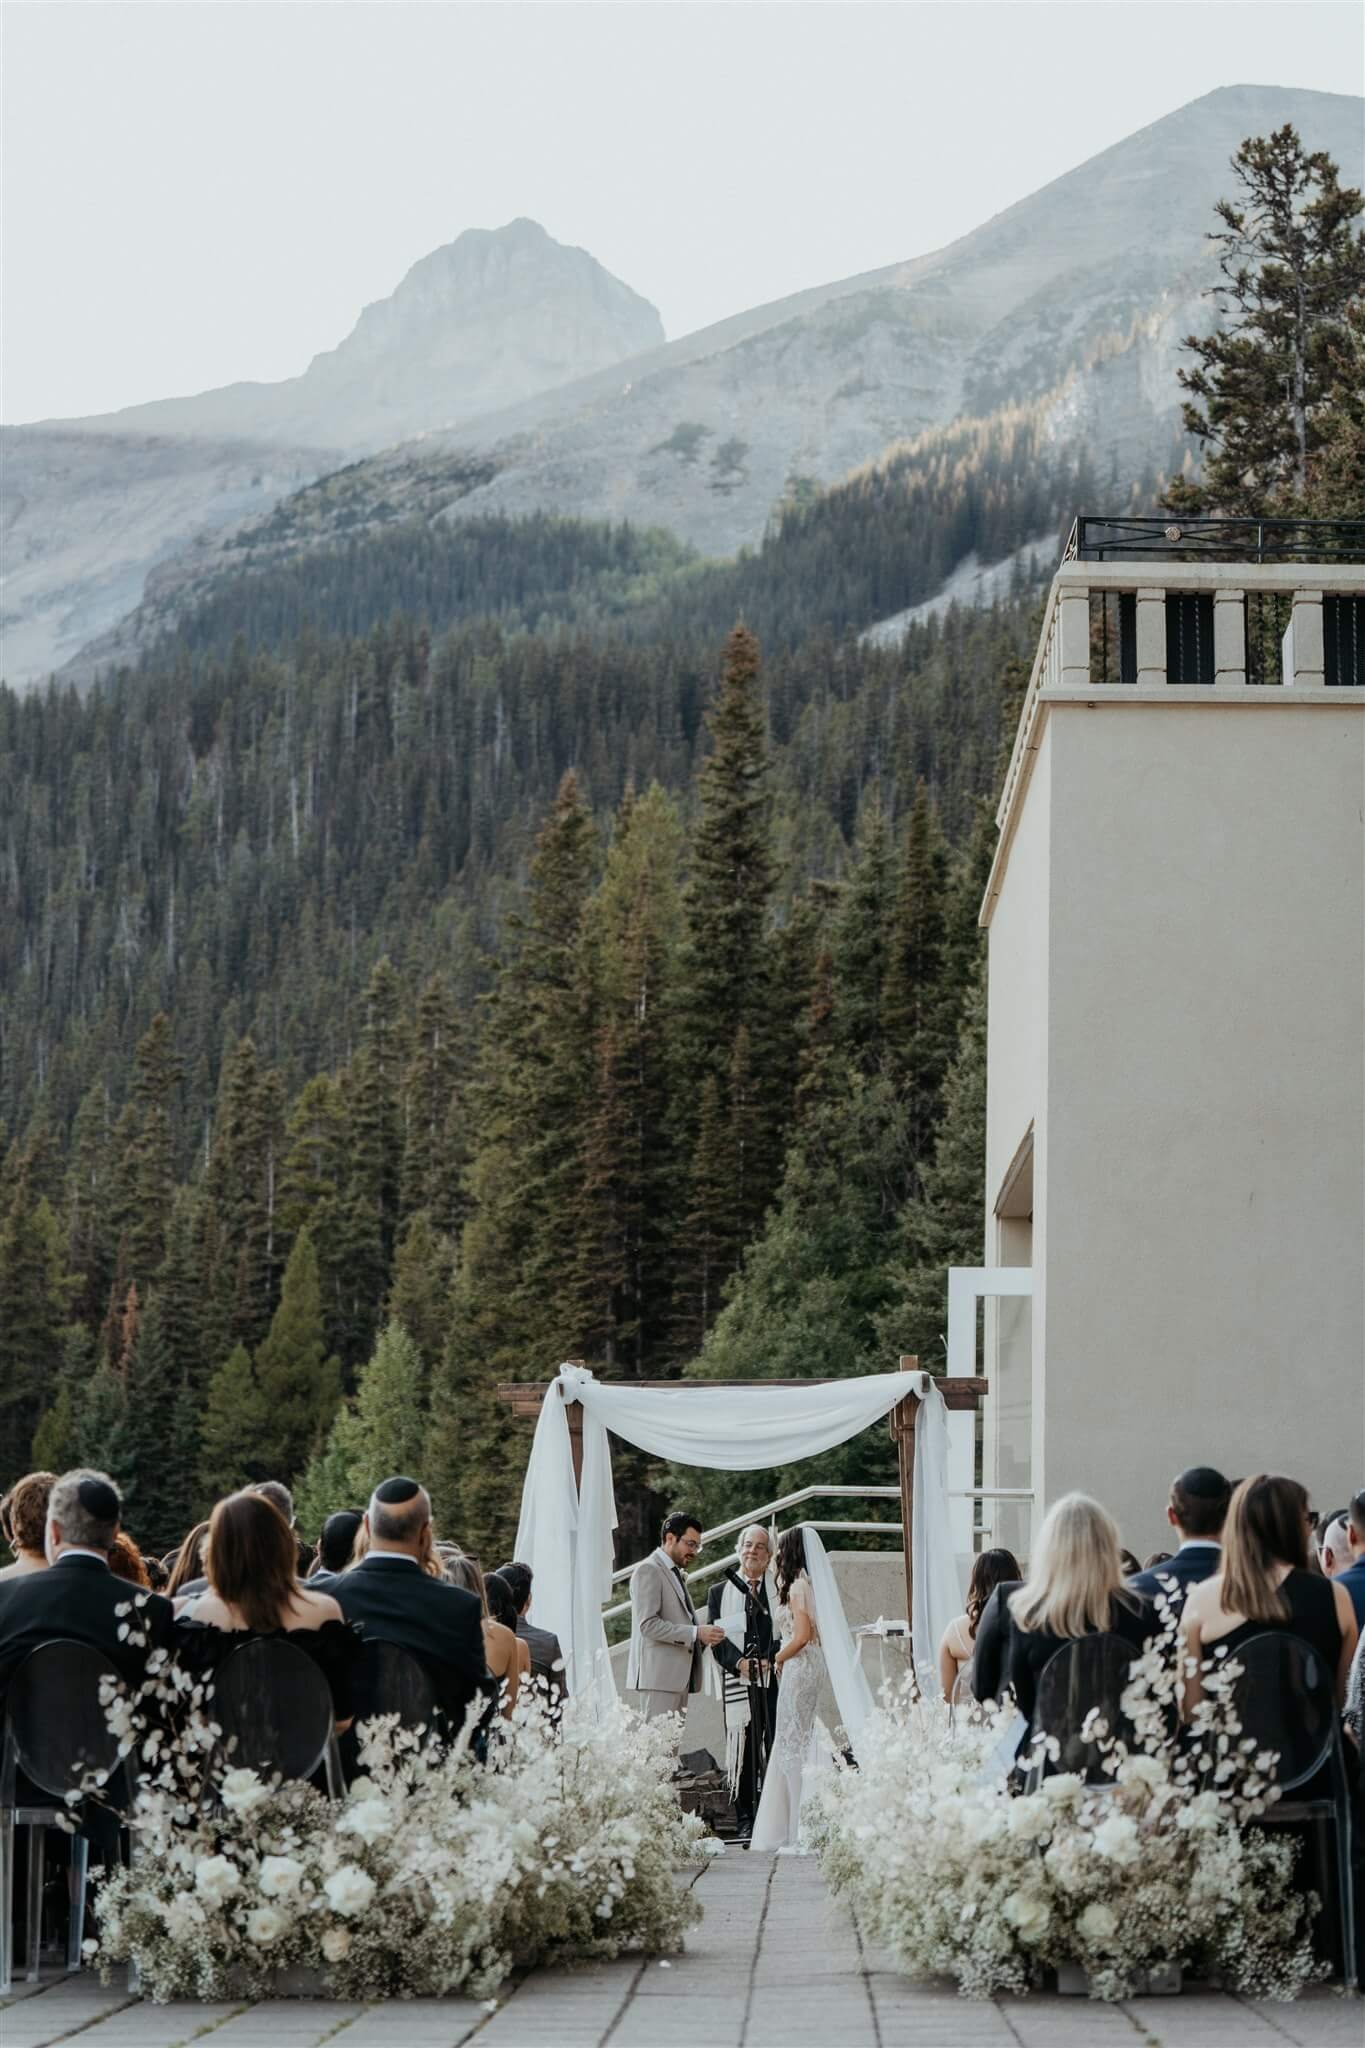 Outdoor wedding ceremony by Lake Louise in Alberta Canada